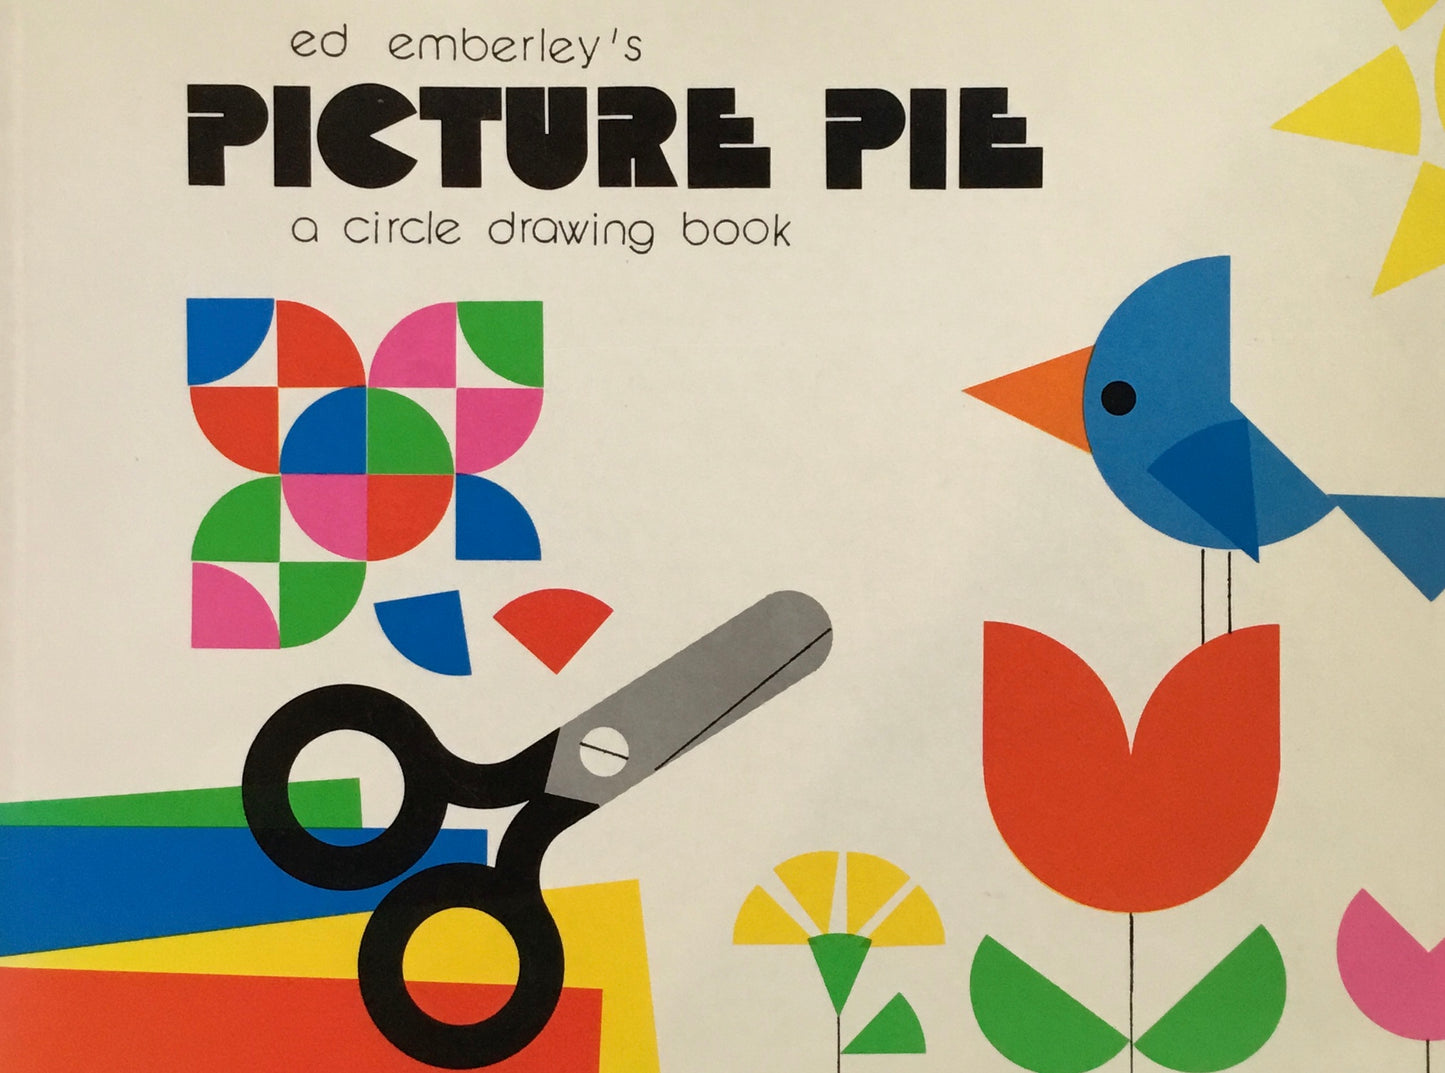 Ed Emberley's Picture Pie　A Circle Drawing Book